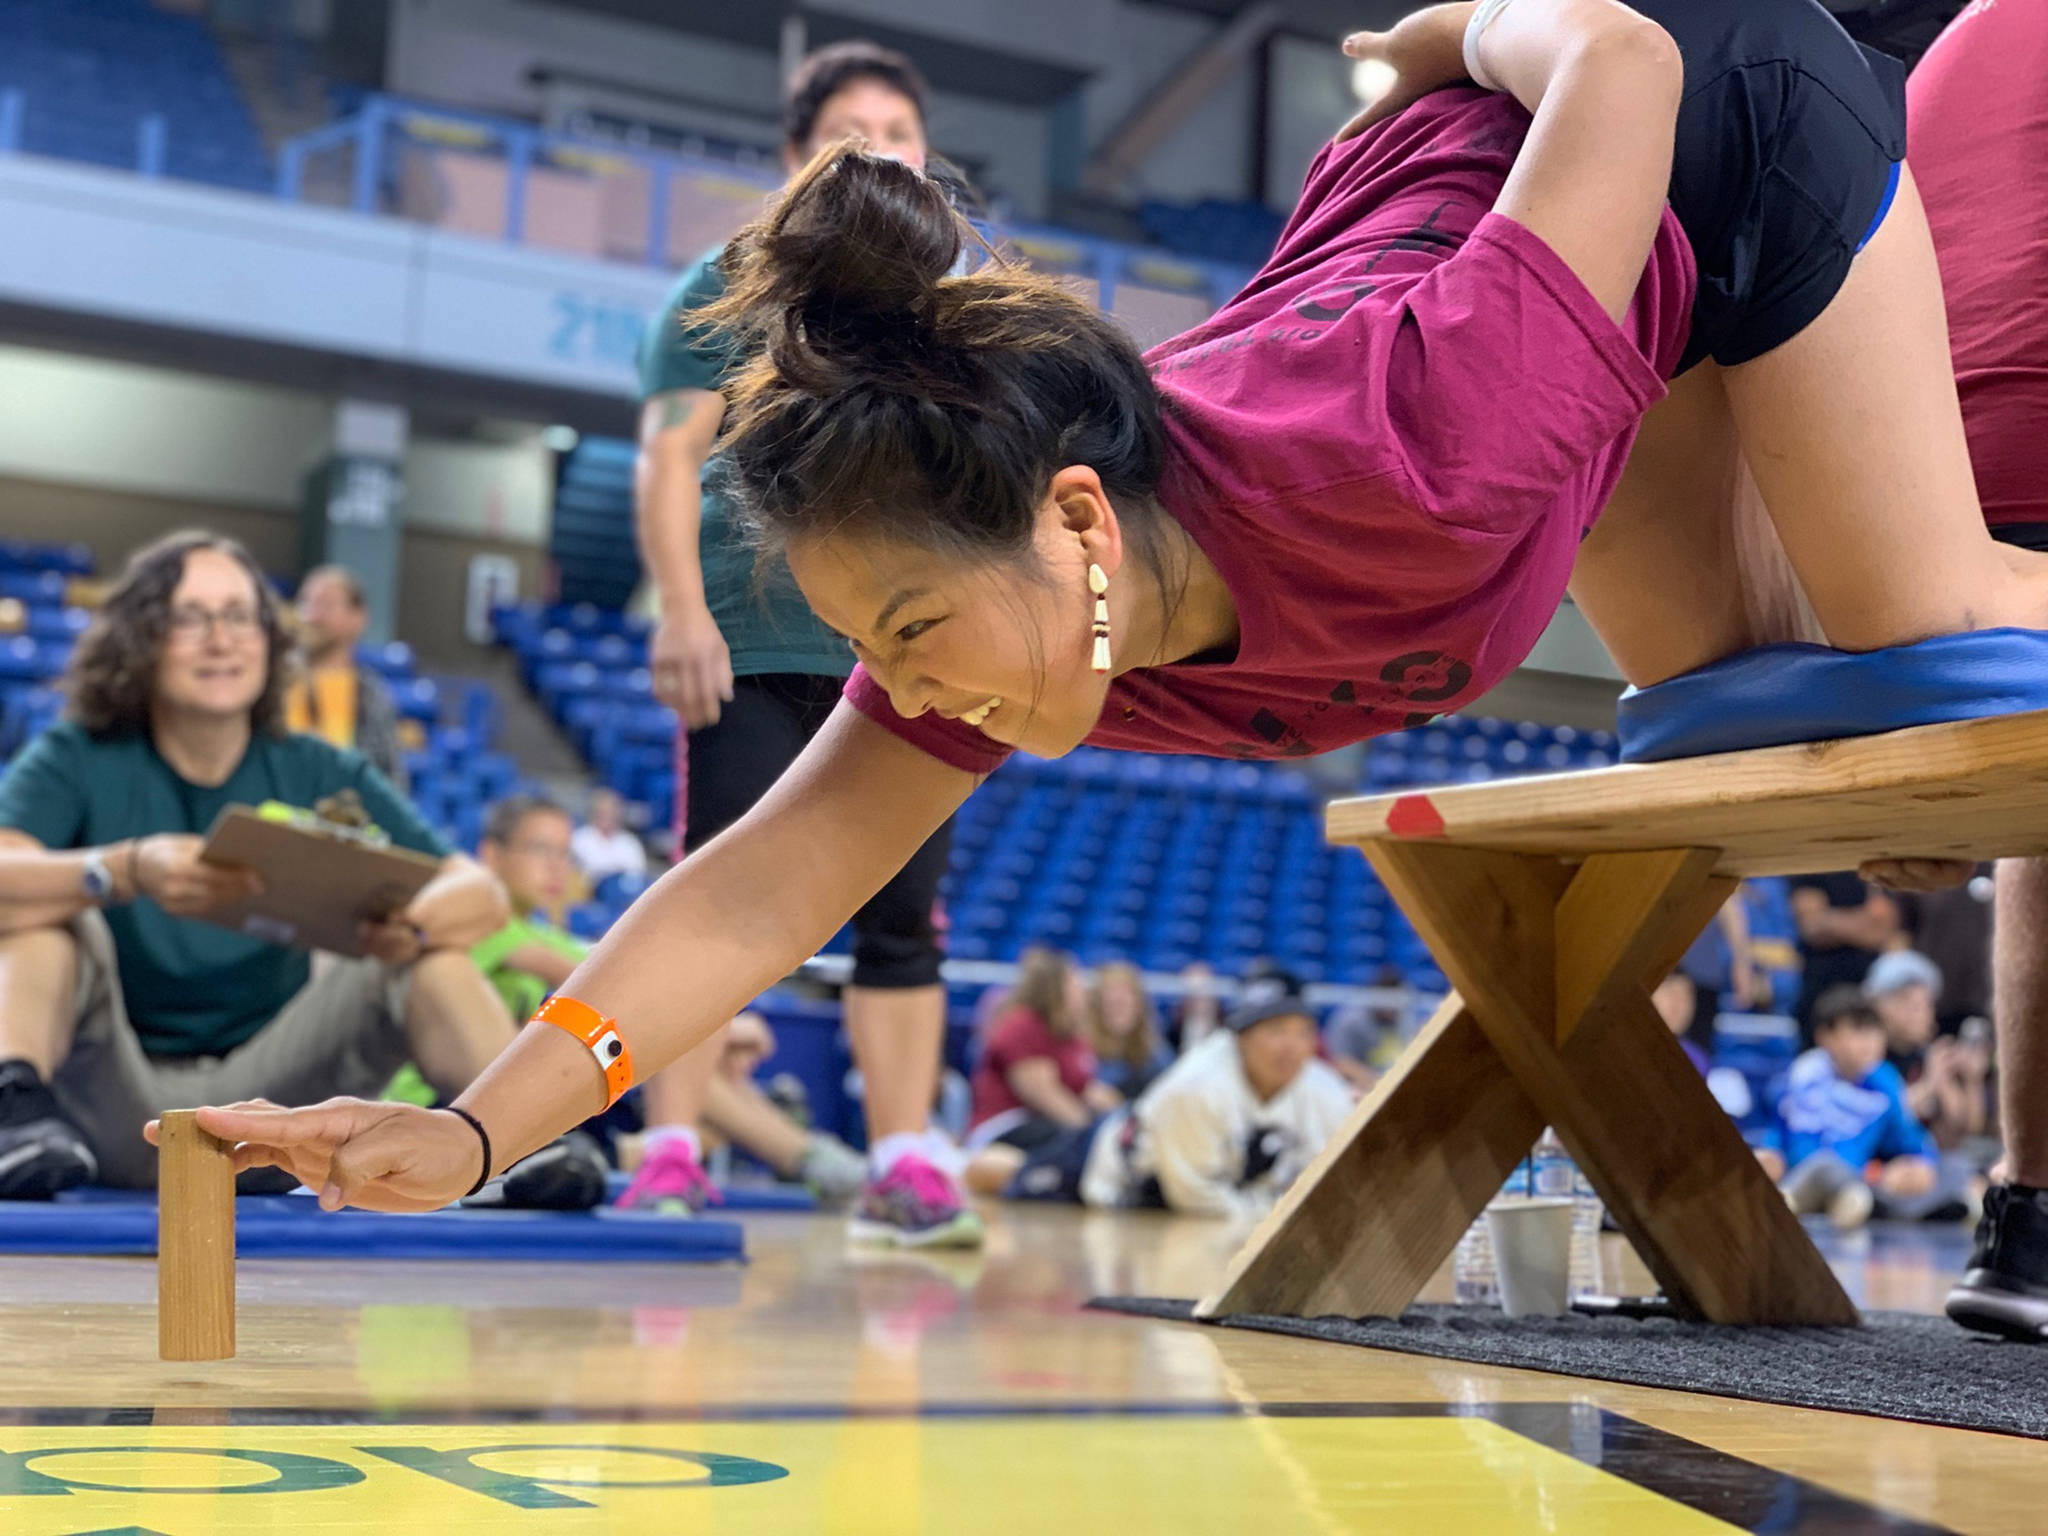 Coach Kaytlynne Lewis competes in the bench reach at the World-Eskimo Indian Olympics at the Carlson Center in Fairbanks on Saturday, July 20, 2019. (Greg Lincoln | For the Juneau Empire)